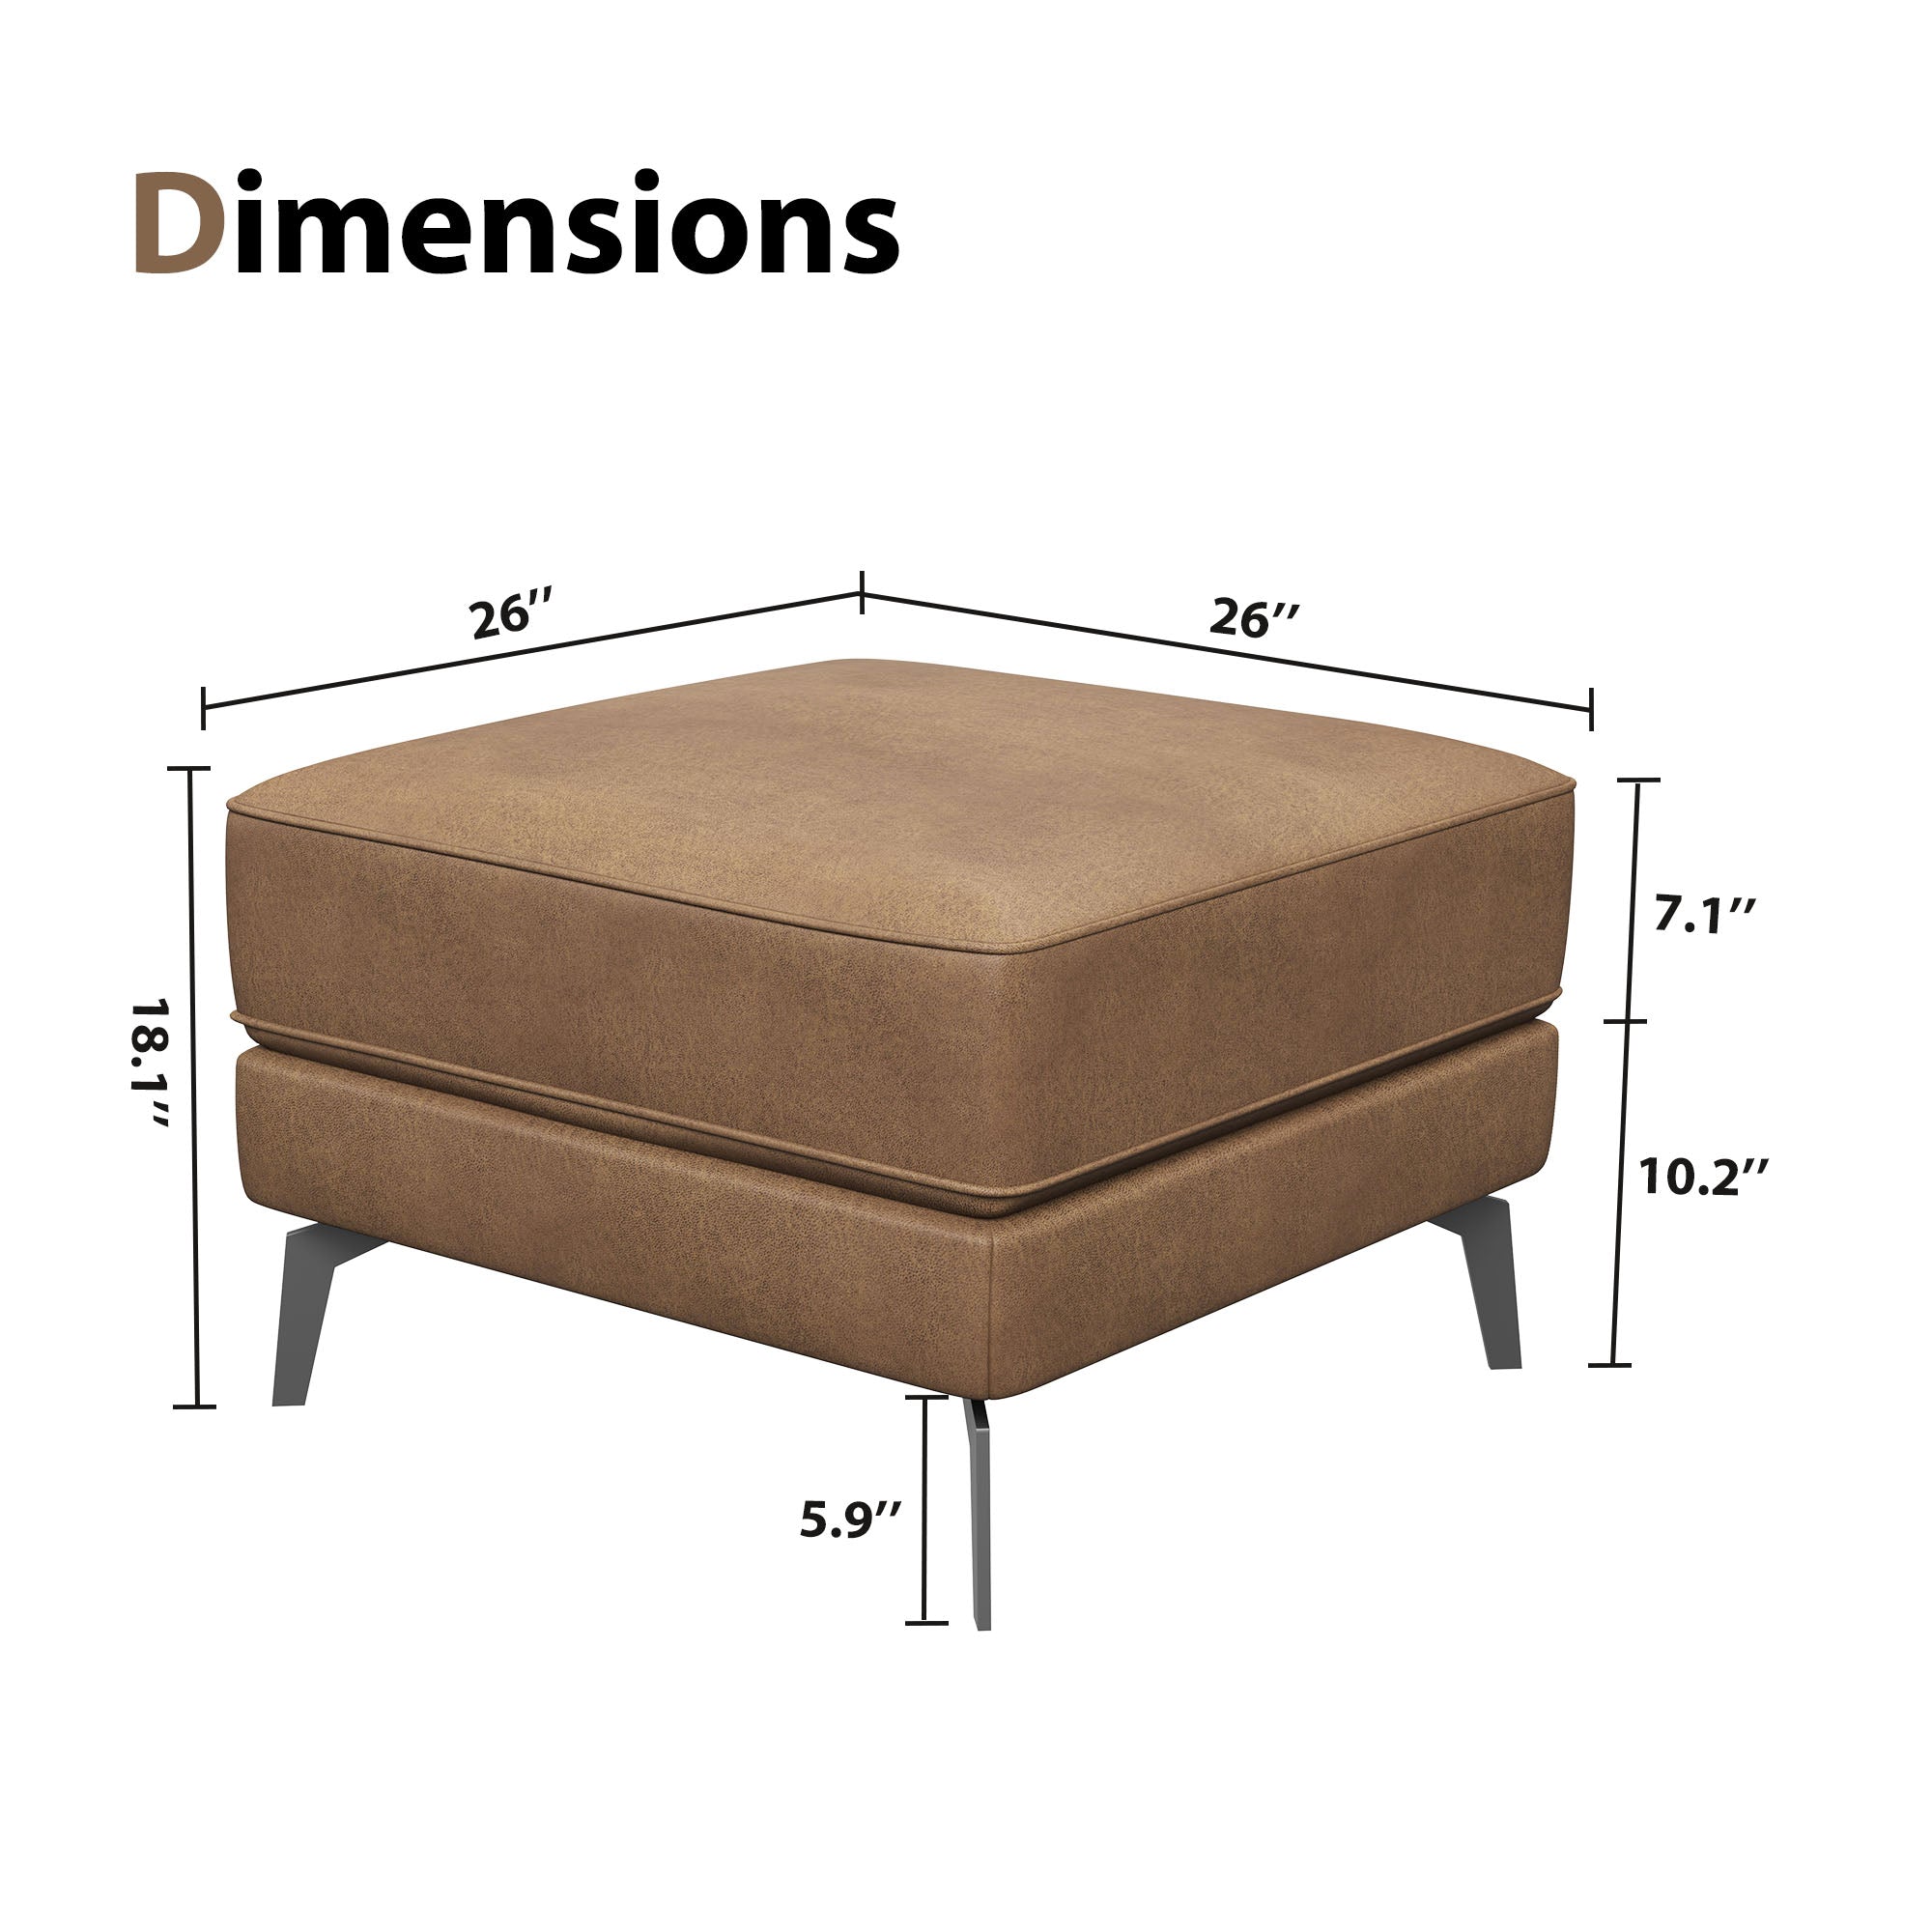 NOLANY 26" Wide Square Padded Ottoman 